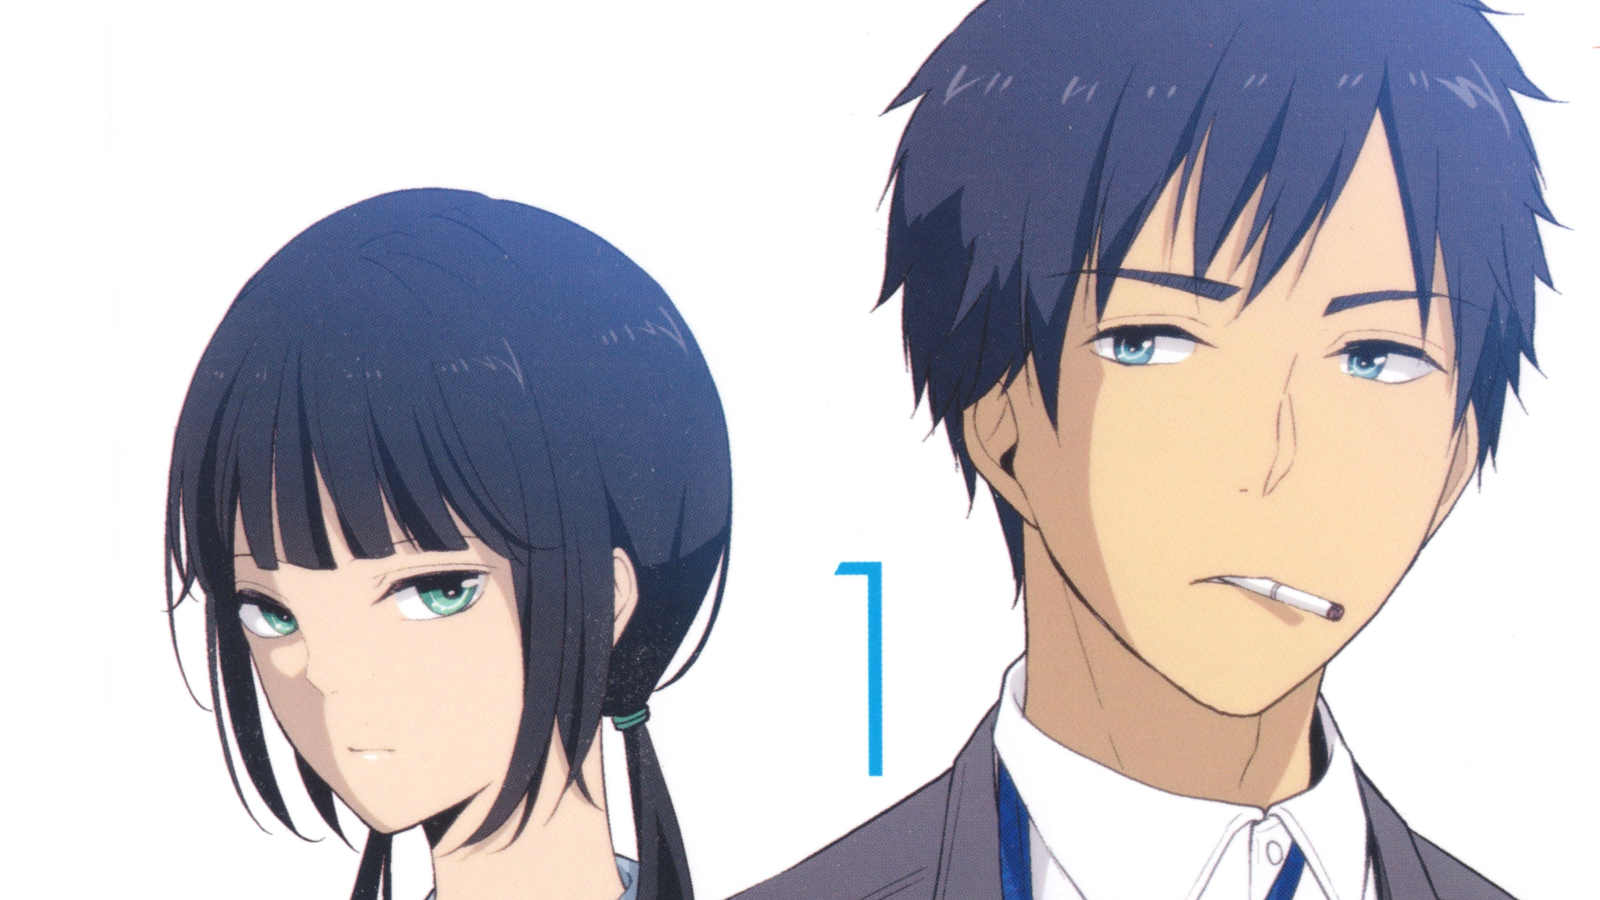 How to Watch the ReLIFE Series in Order - TechNadu